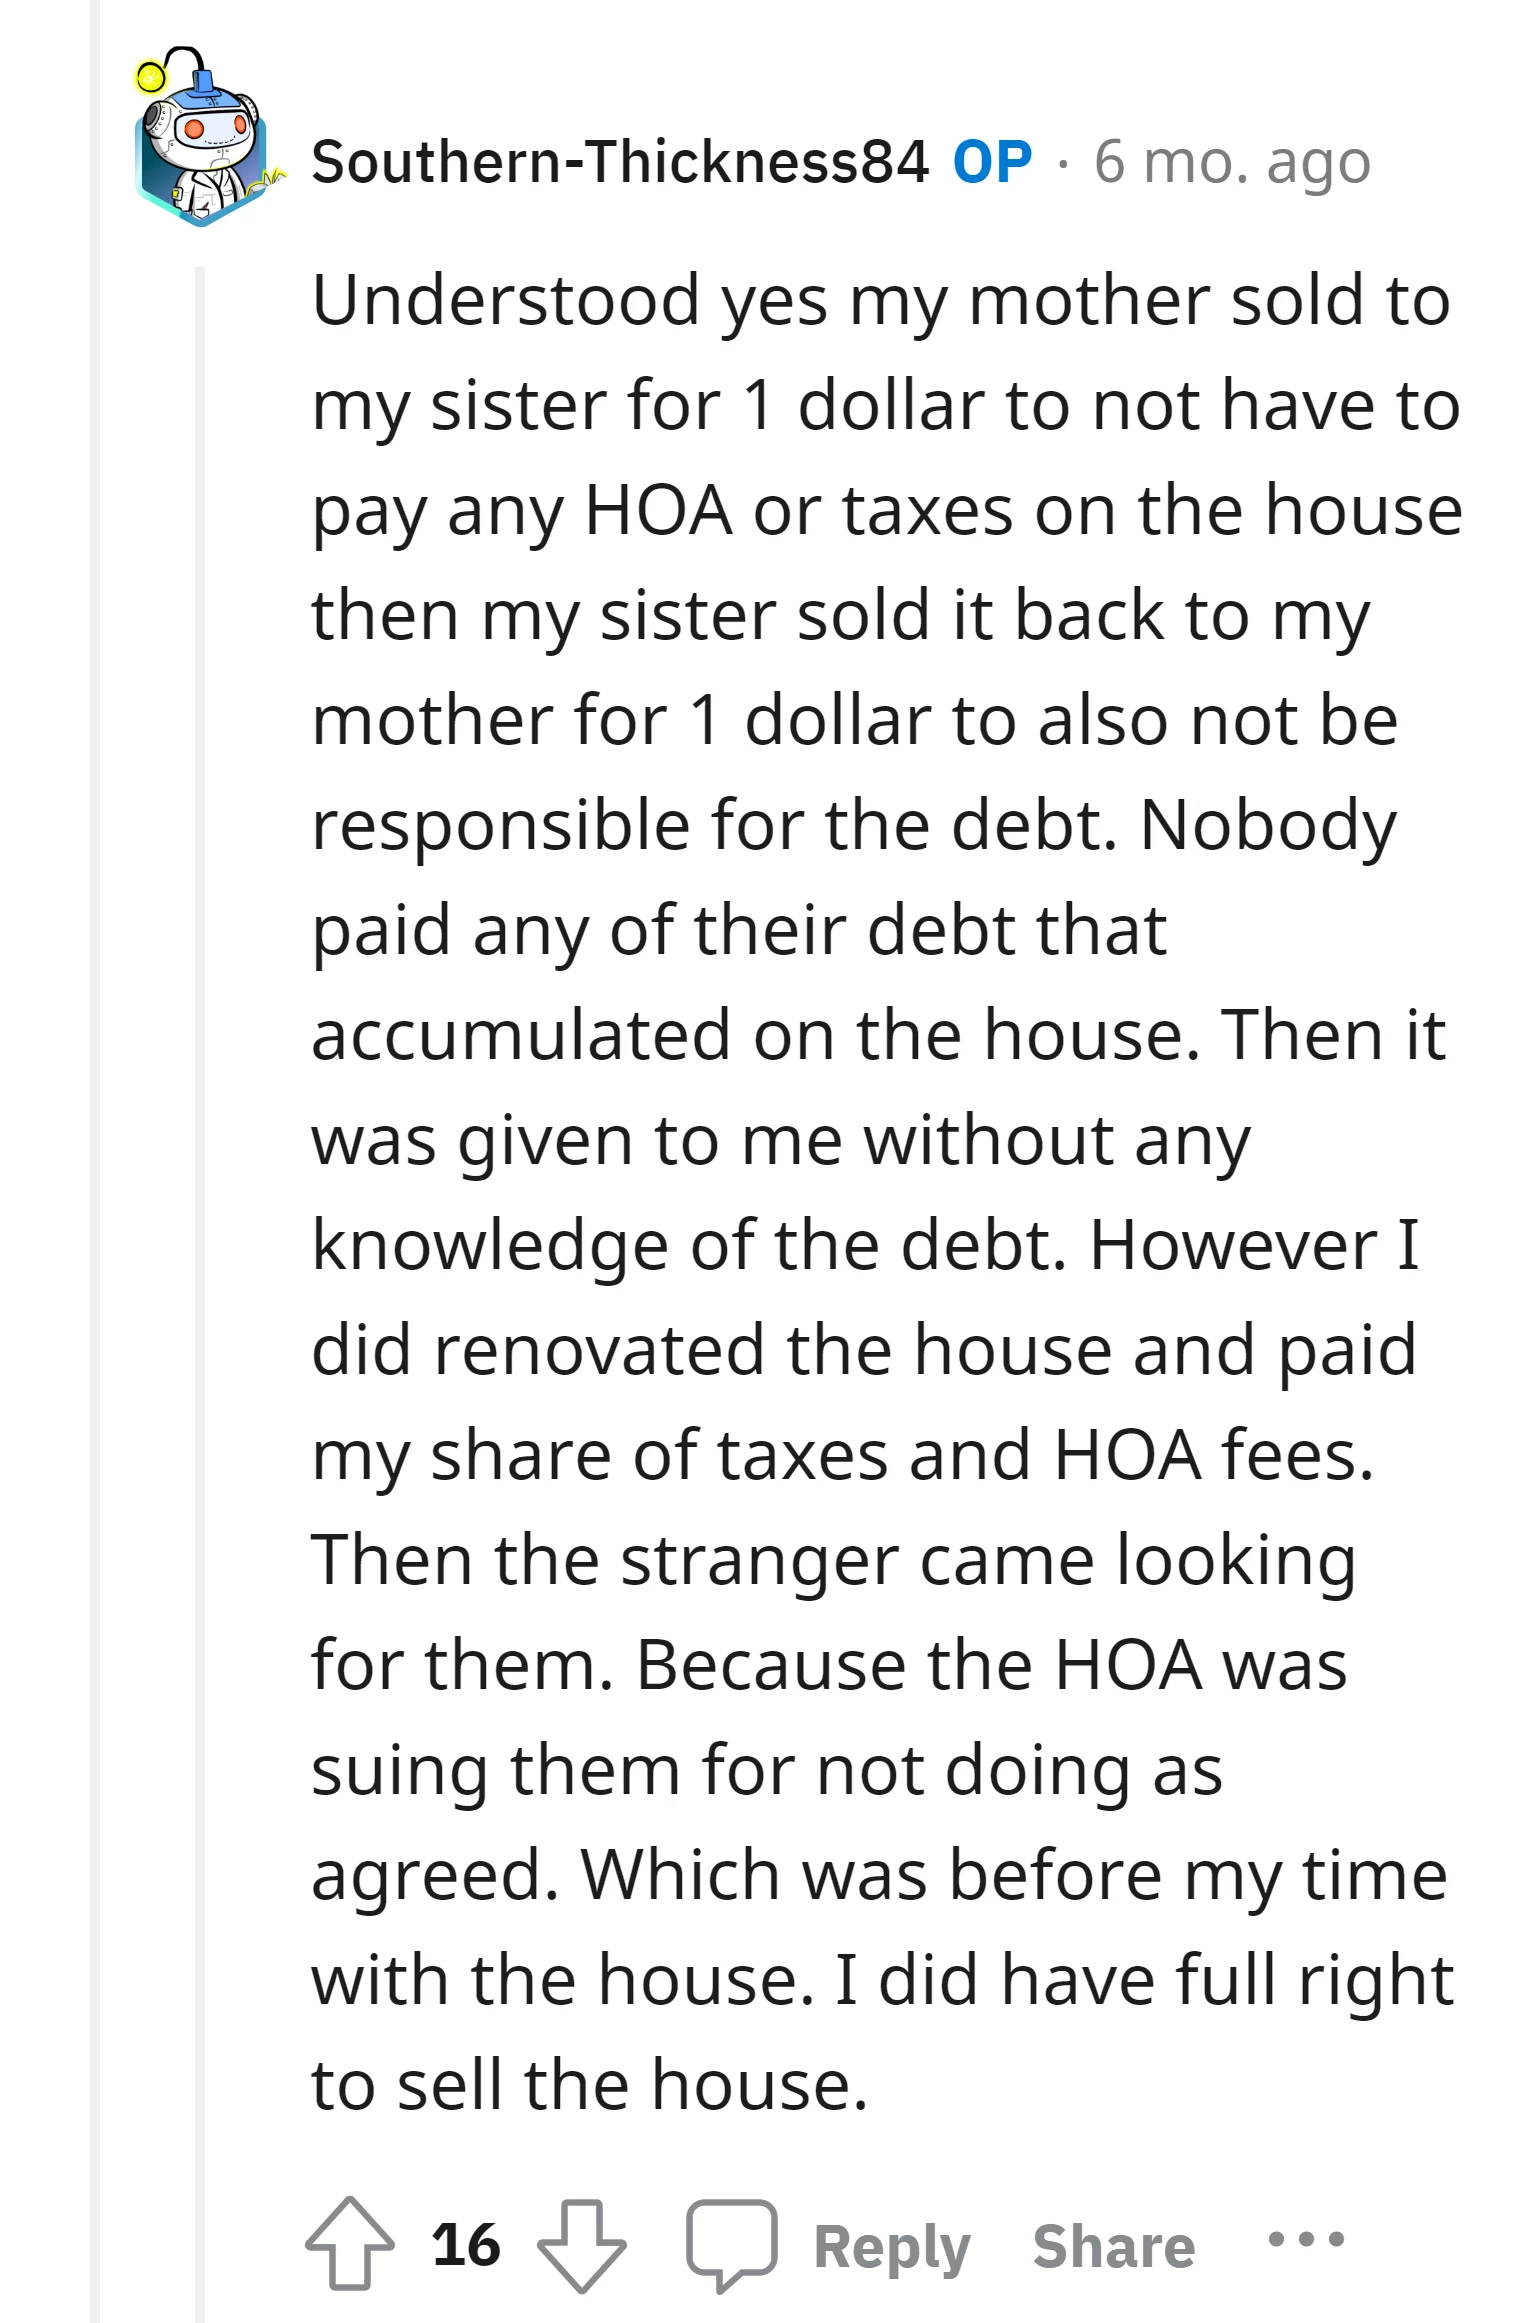 The house was given to the OP without knowledge of the deb